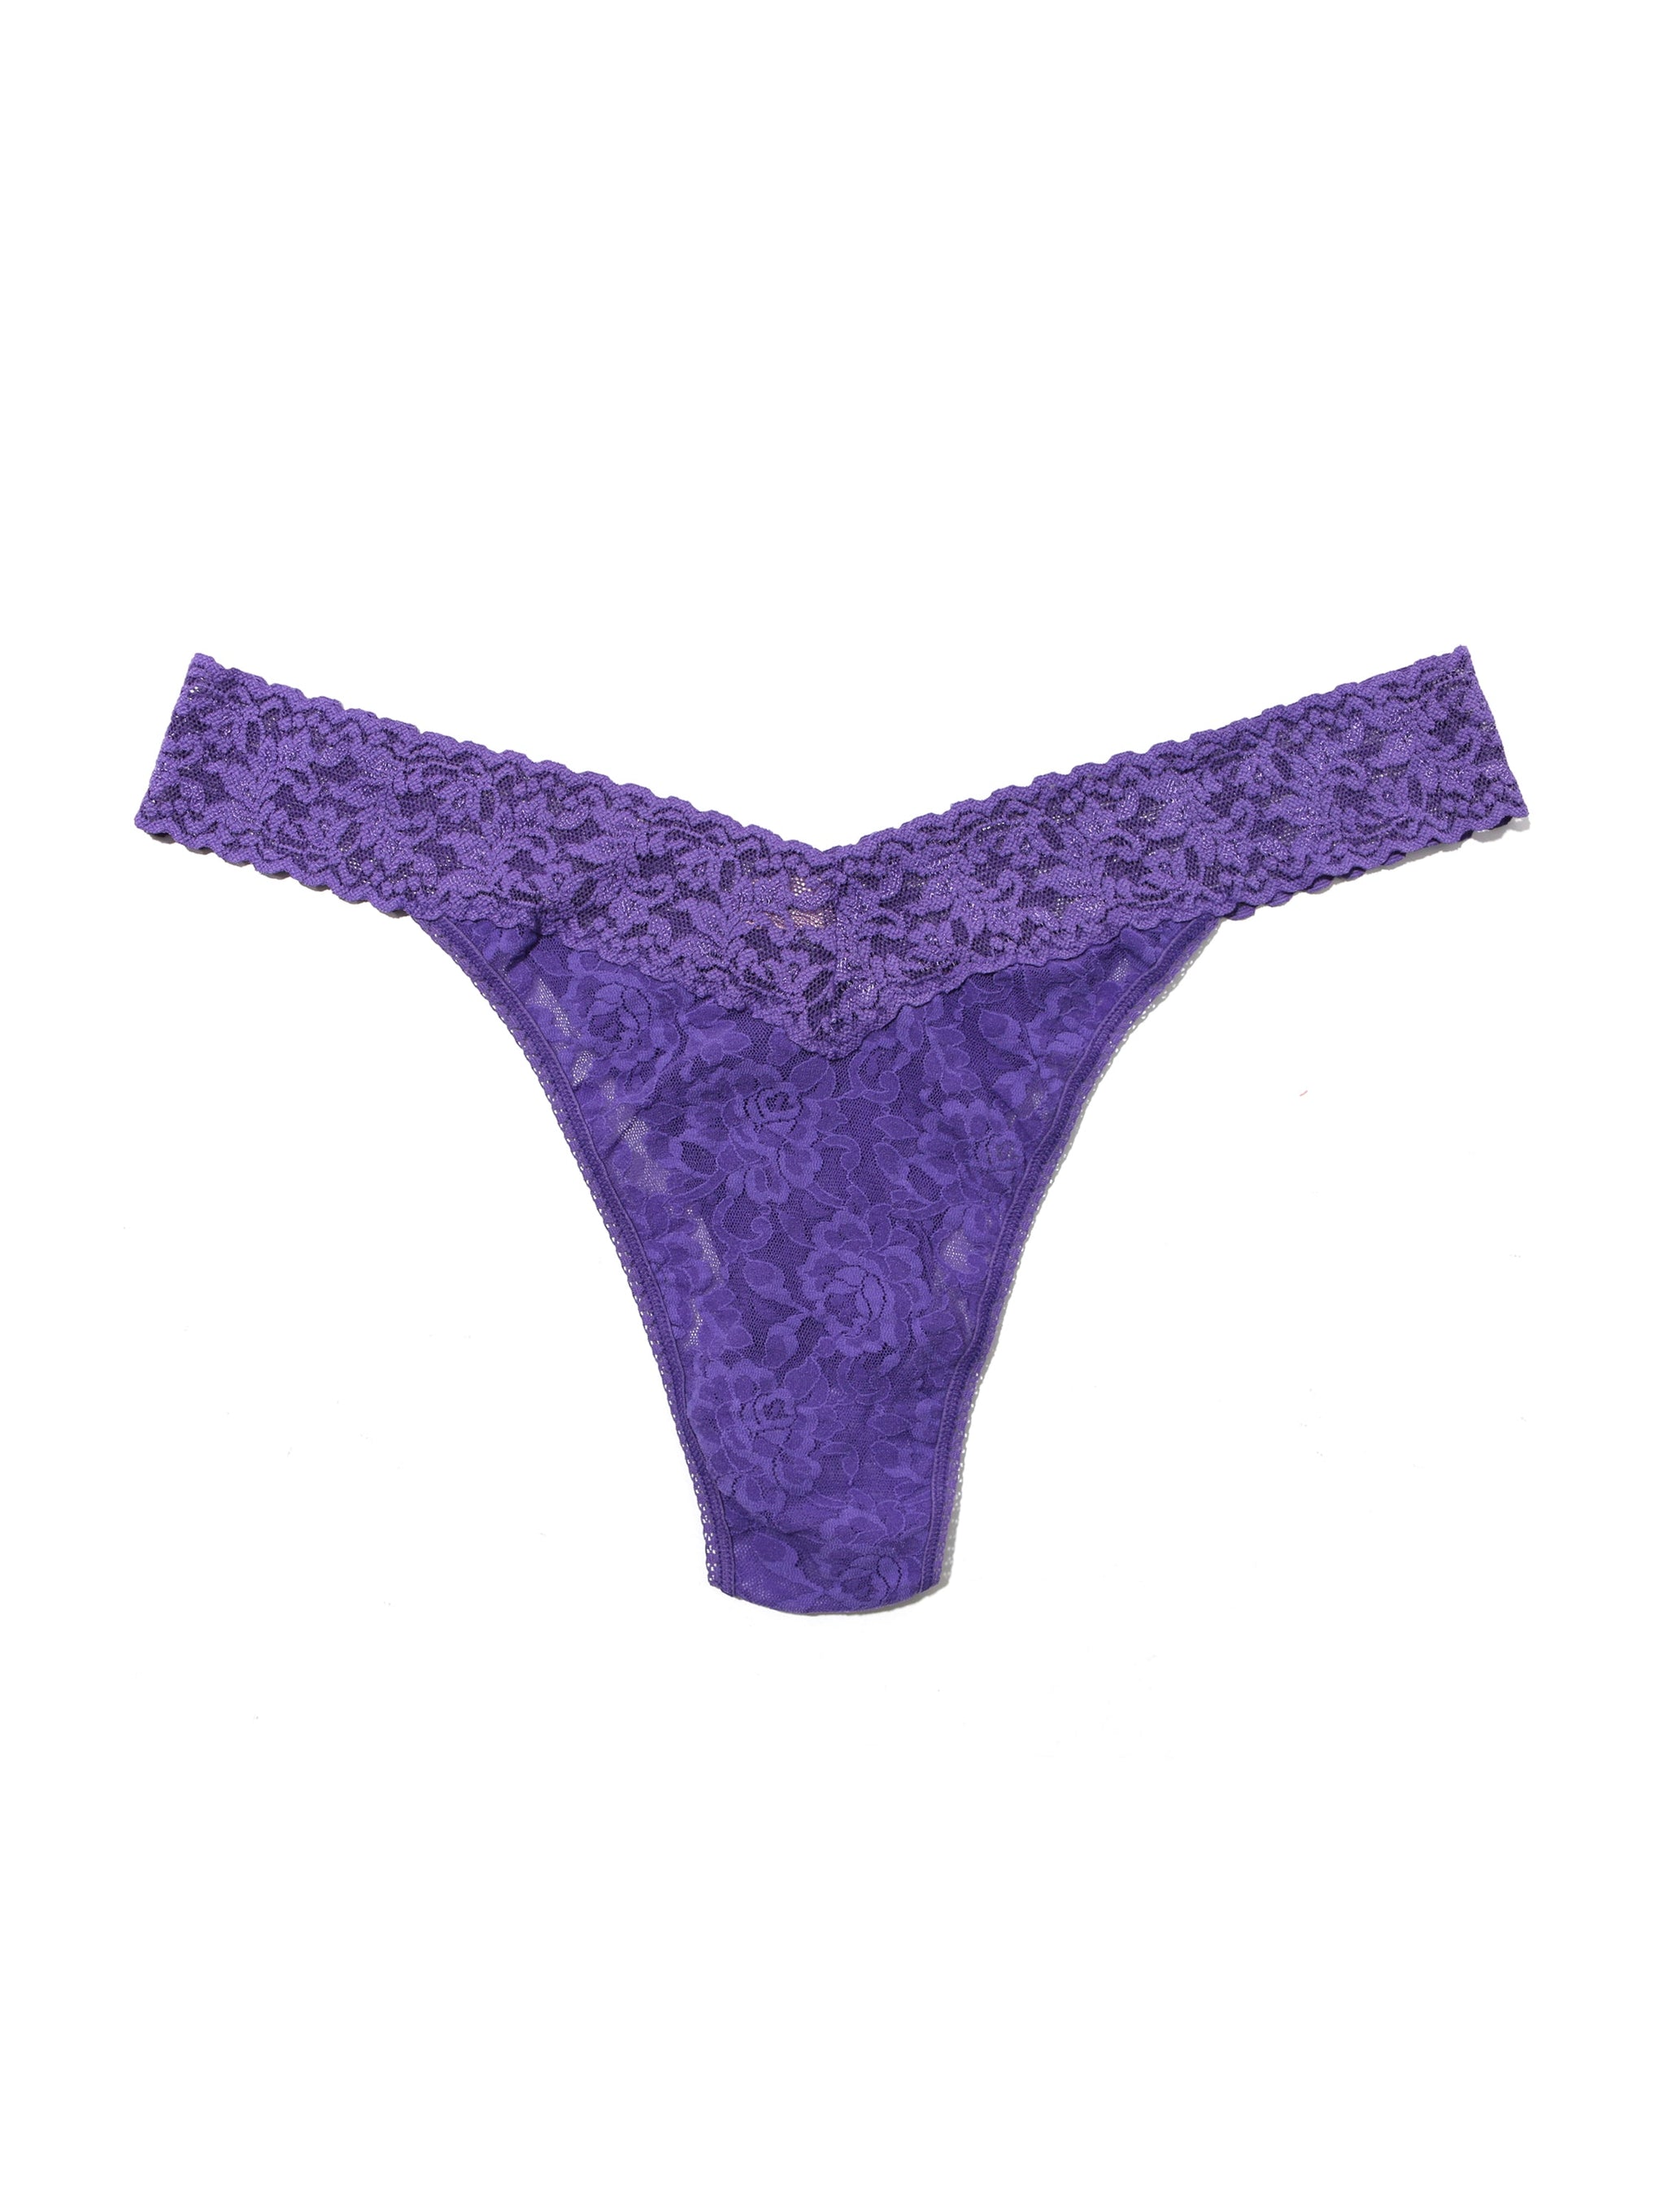 Original rise all-lace thong Plus size (fits 14 to 24), Hanky Panky